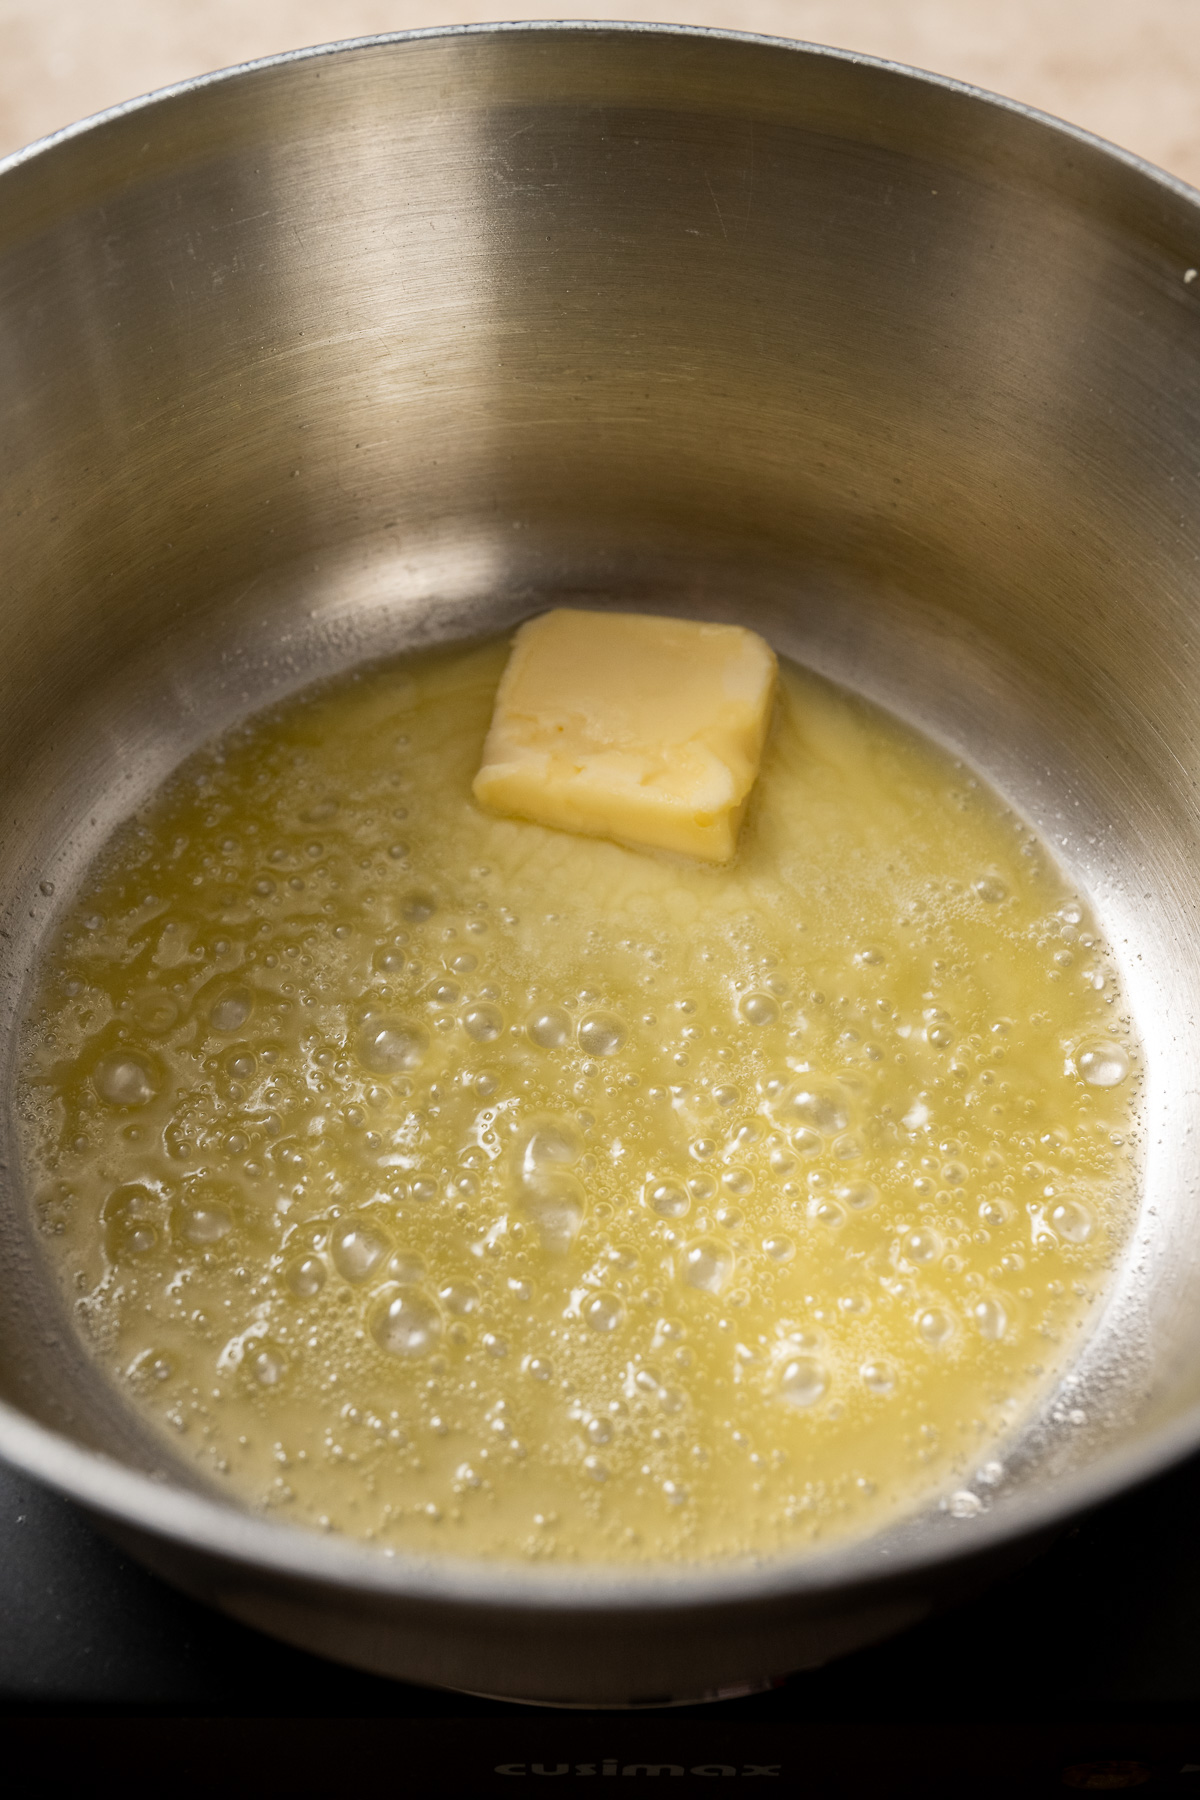 Vegan butter being melted in a stainless steel pot.